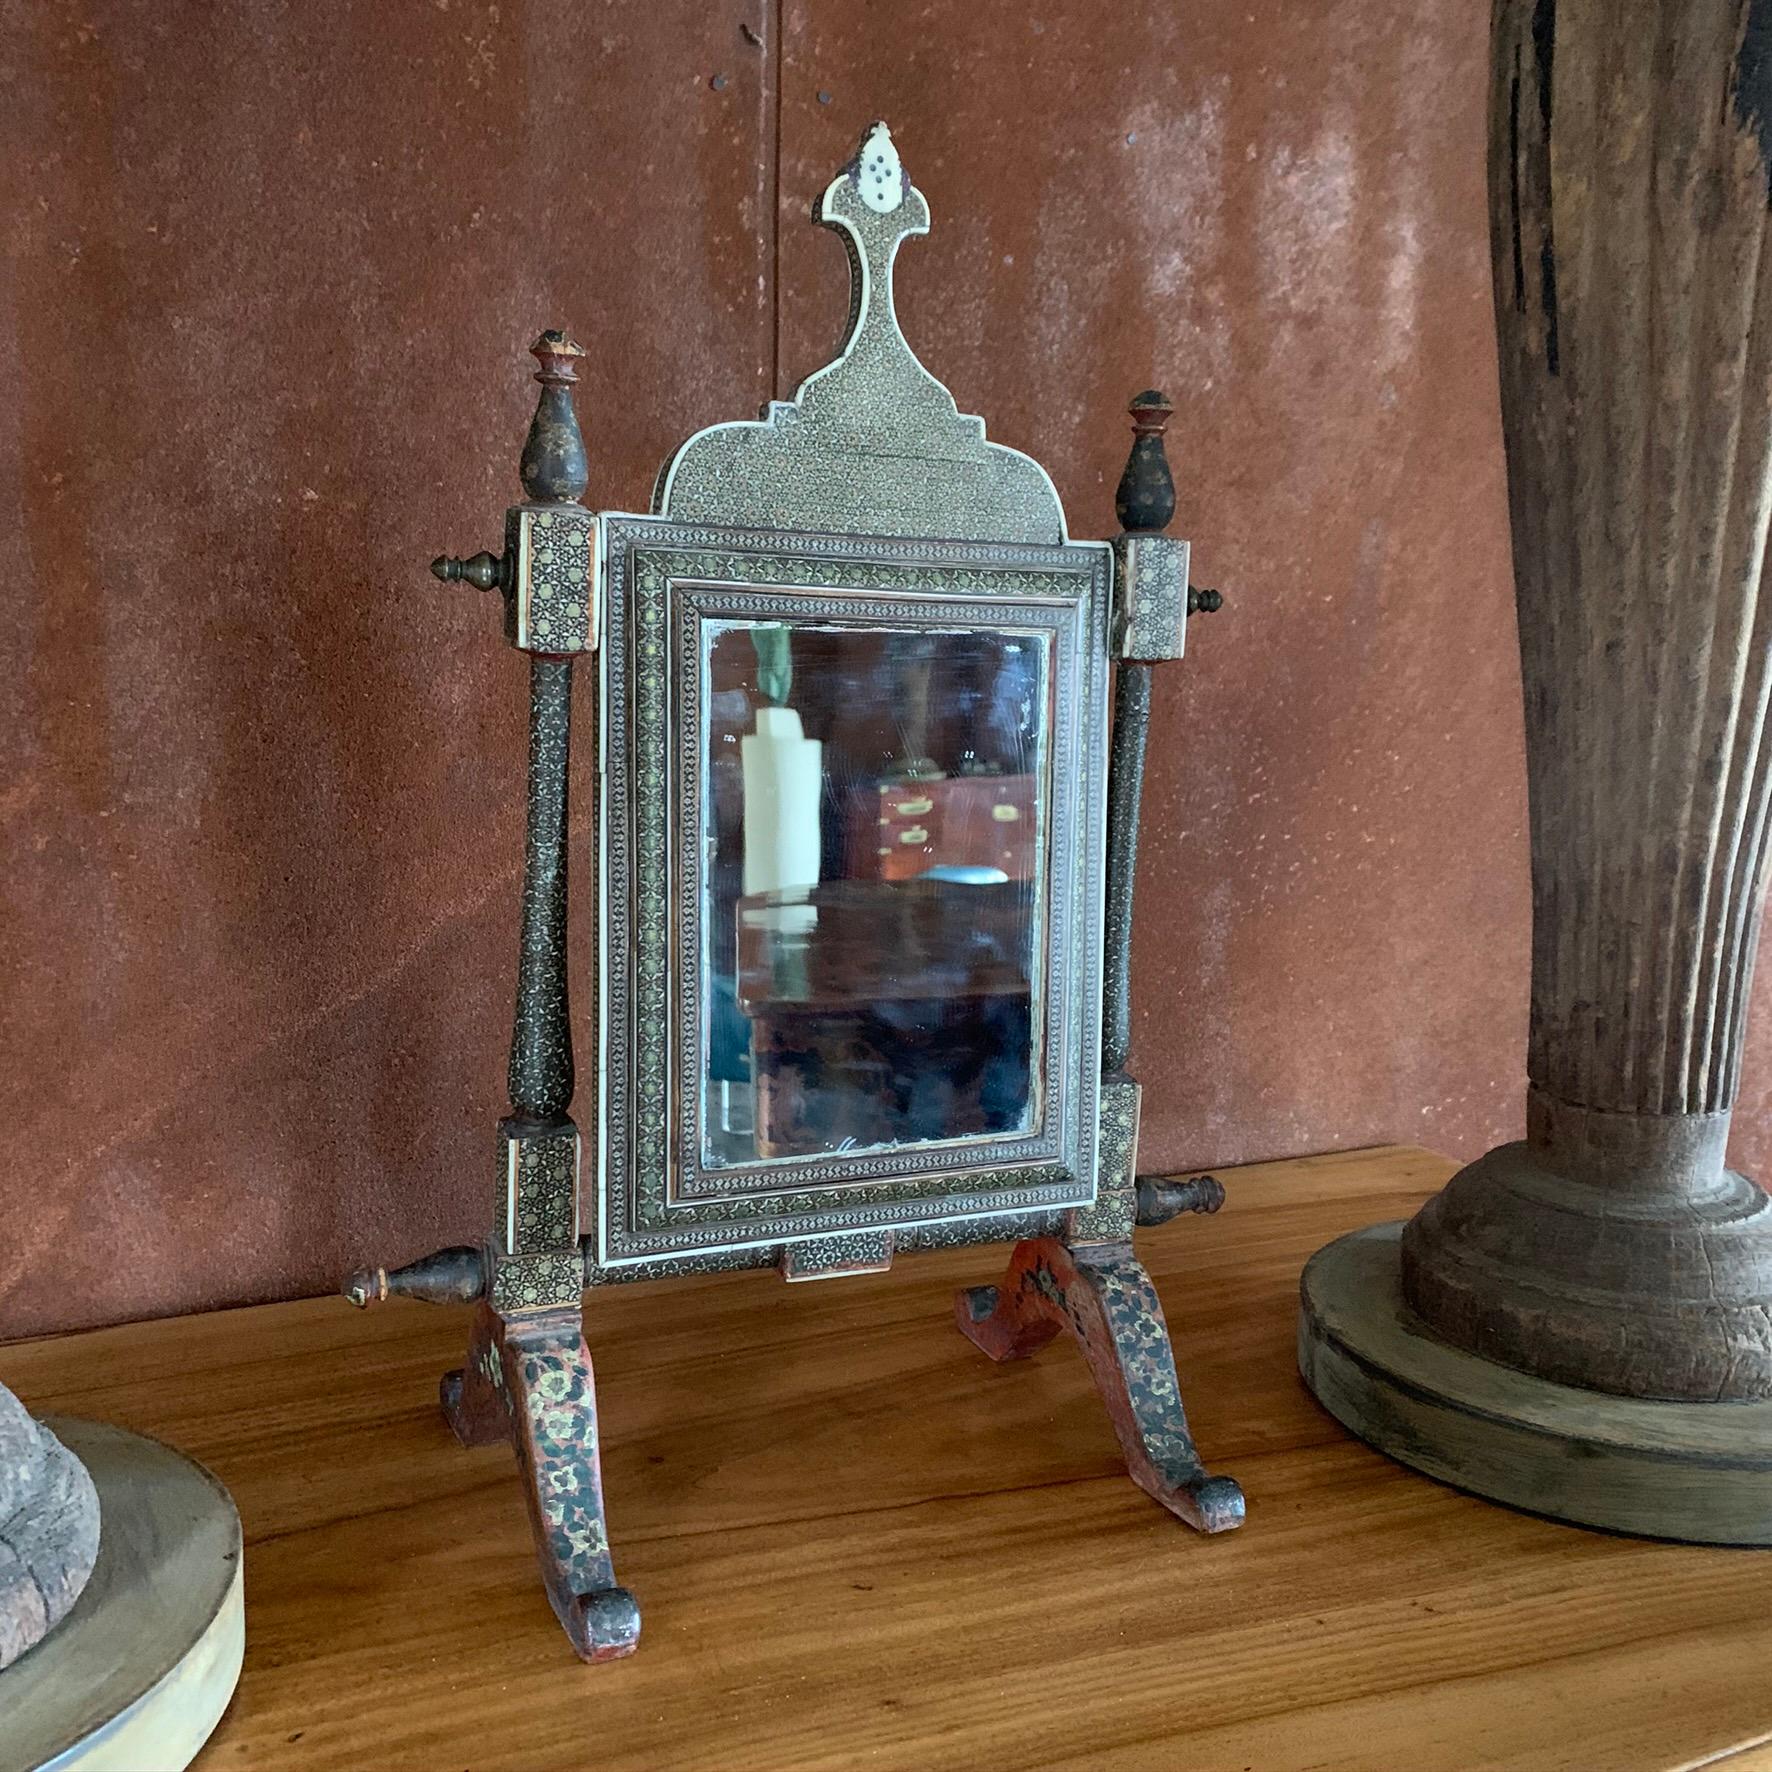 A stunning mid-19th century Indian dressing table mirror with intricate micro mosaic design, known as Sadeli. The micro mosaic pieces comprise of brass, bone and colored woods, placed in geometric and star configurations. The base and finials of the